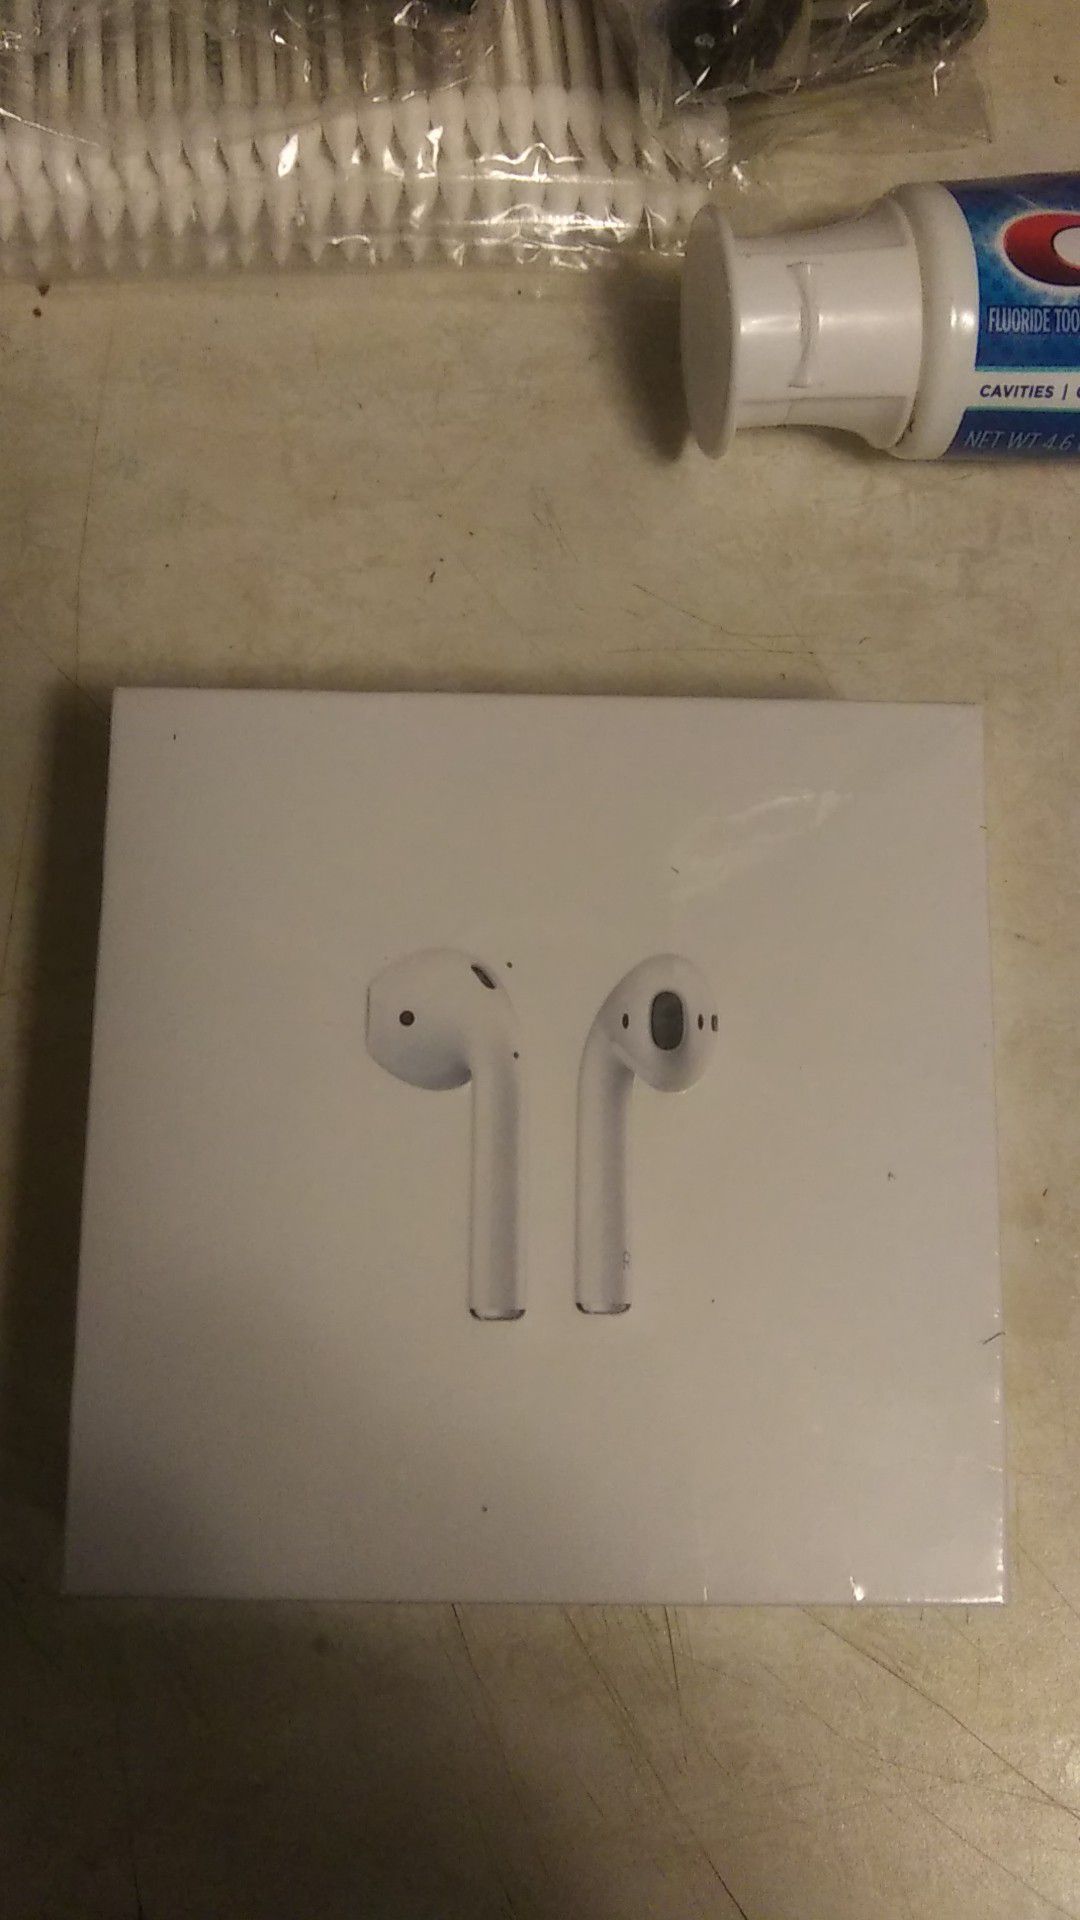 Airpods 2 generation brand new still in plastic